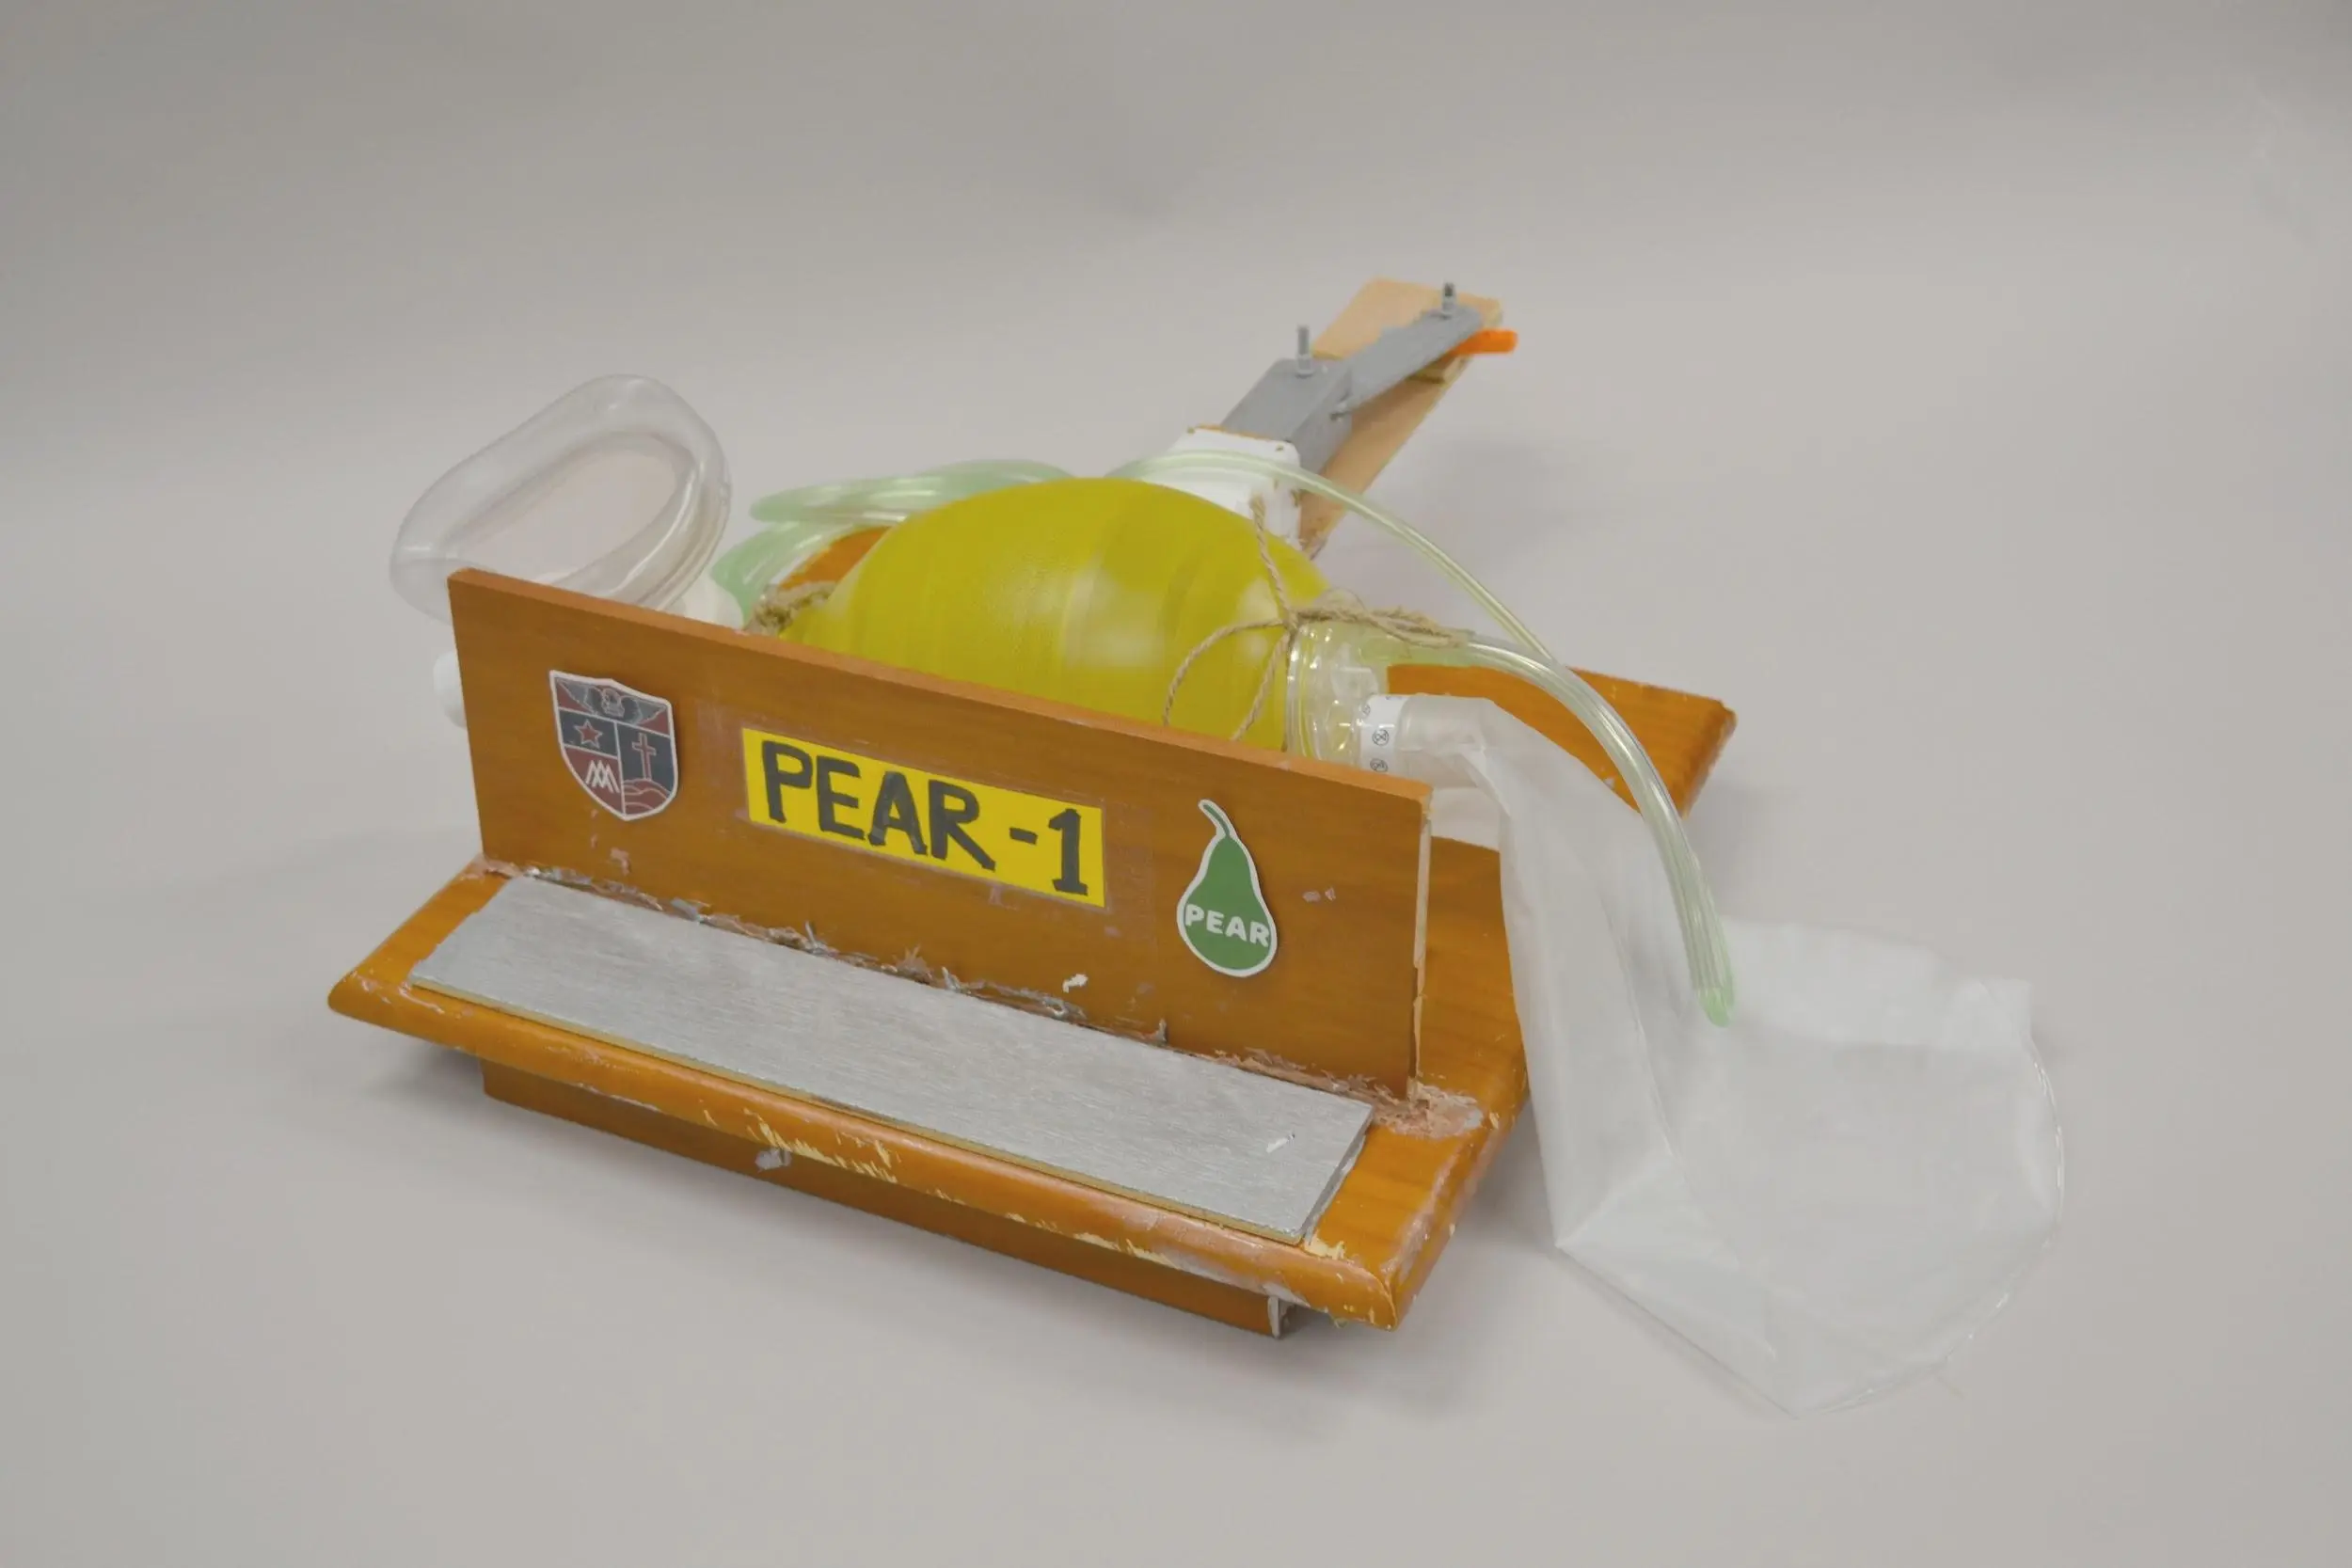 A homemade breathing apparatus with tape and glue visible along with a plastic yellow pump device.